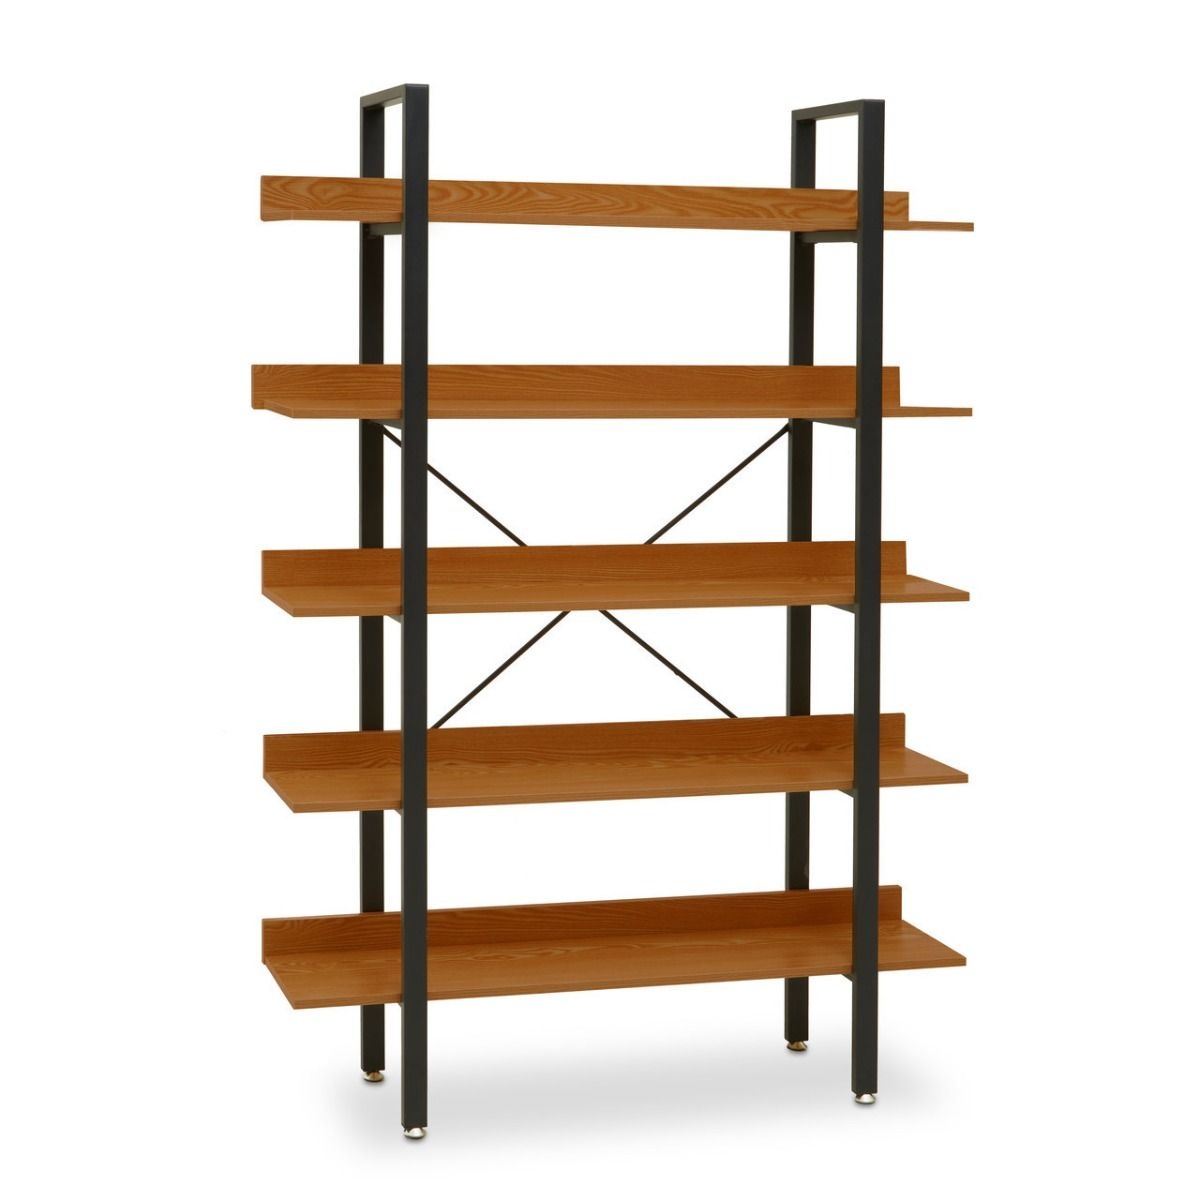 Laxton 5 Tier Wooden Shelving Unit In Red Pomelo With Black Frame